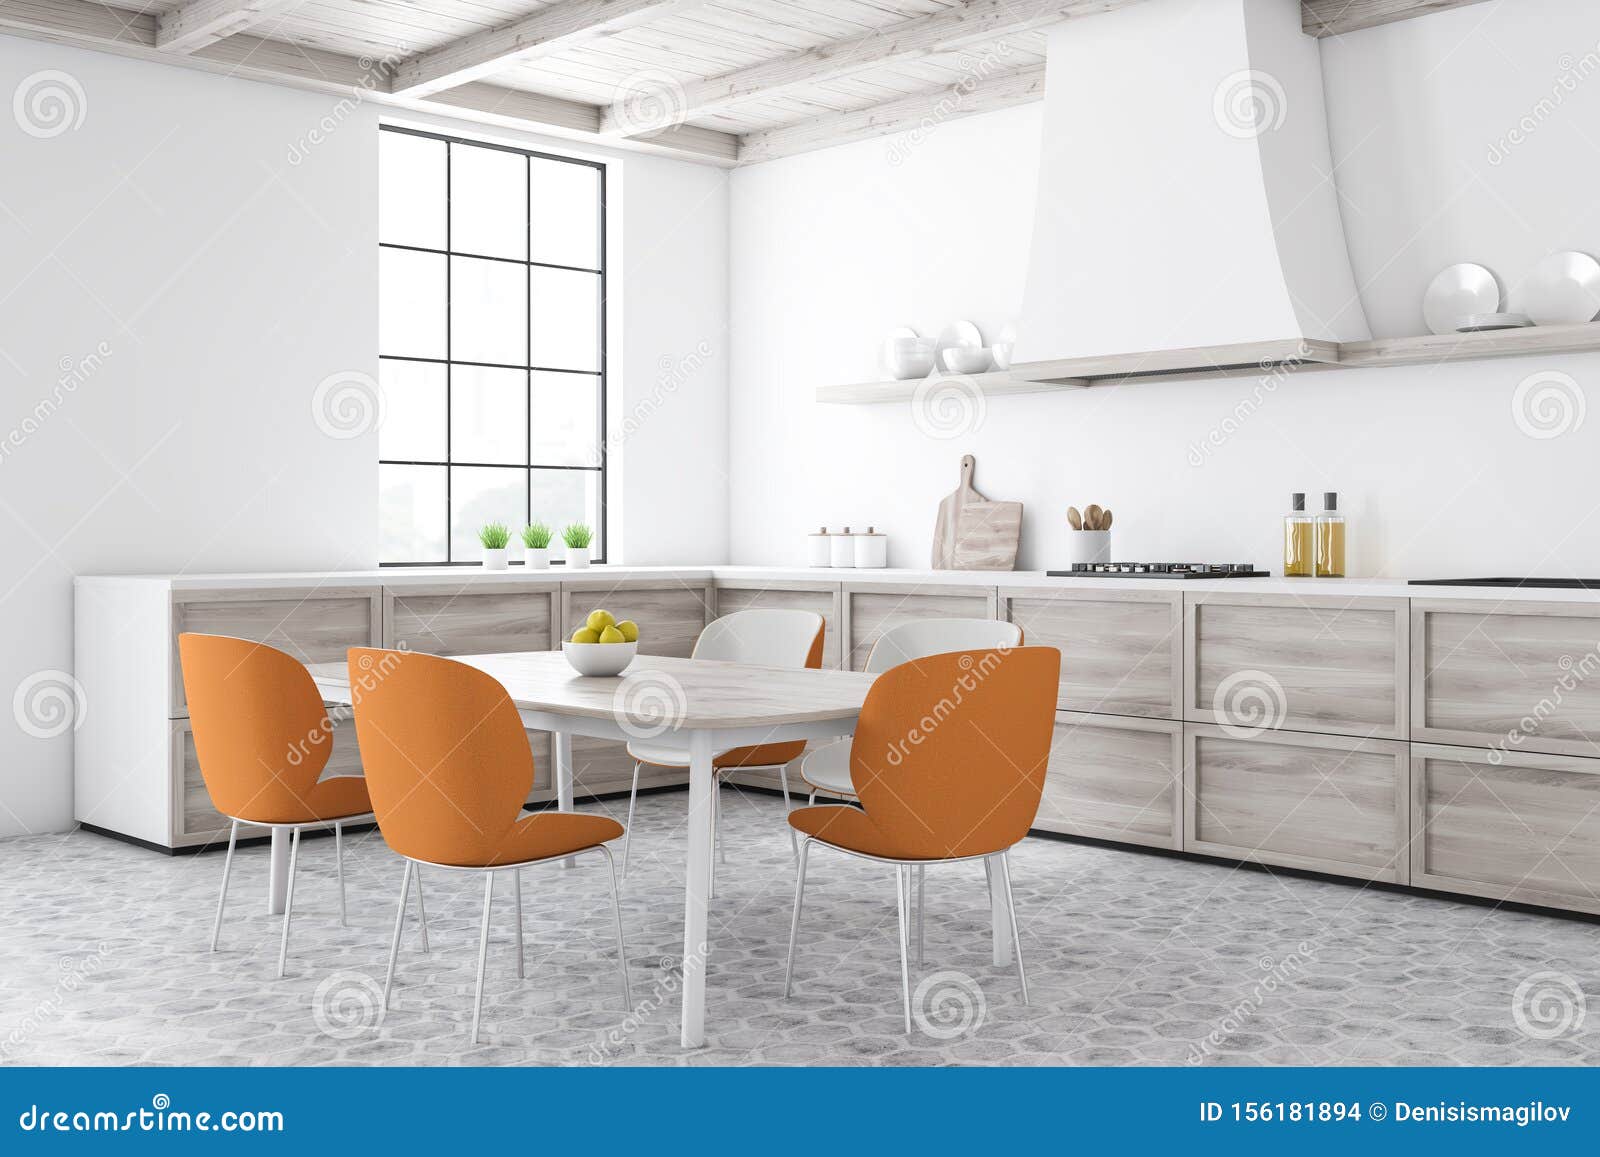 White Kitchen Corner With Dining Table Stock Illustration